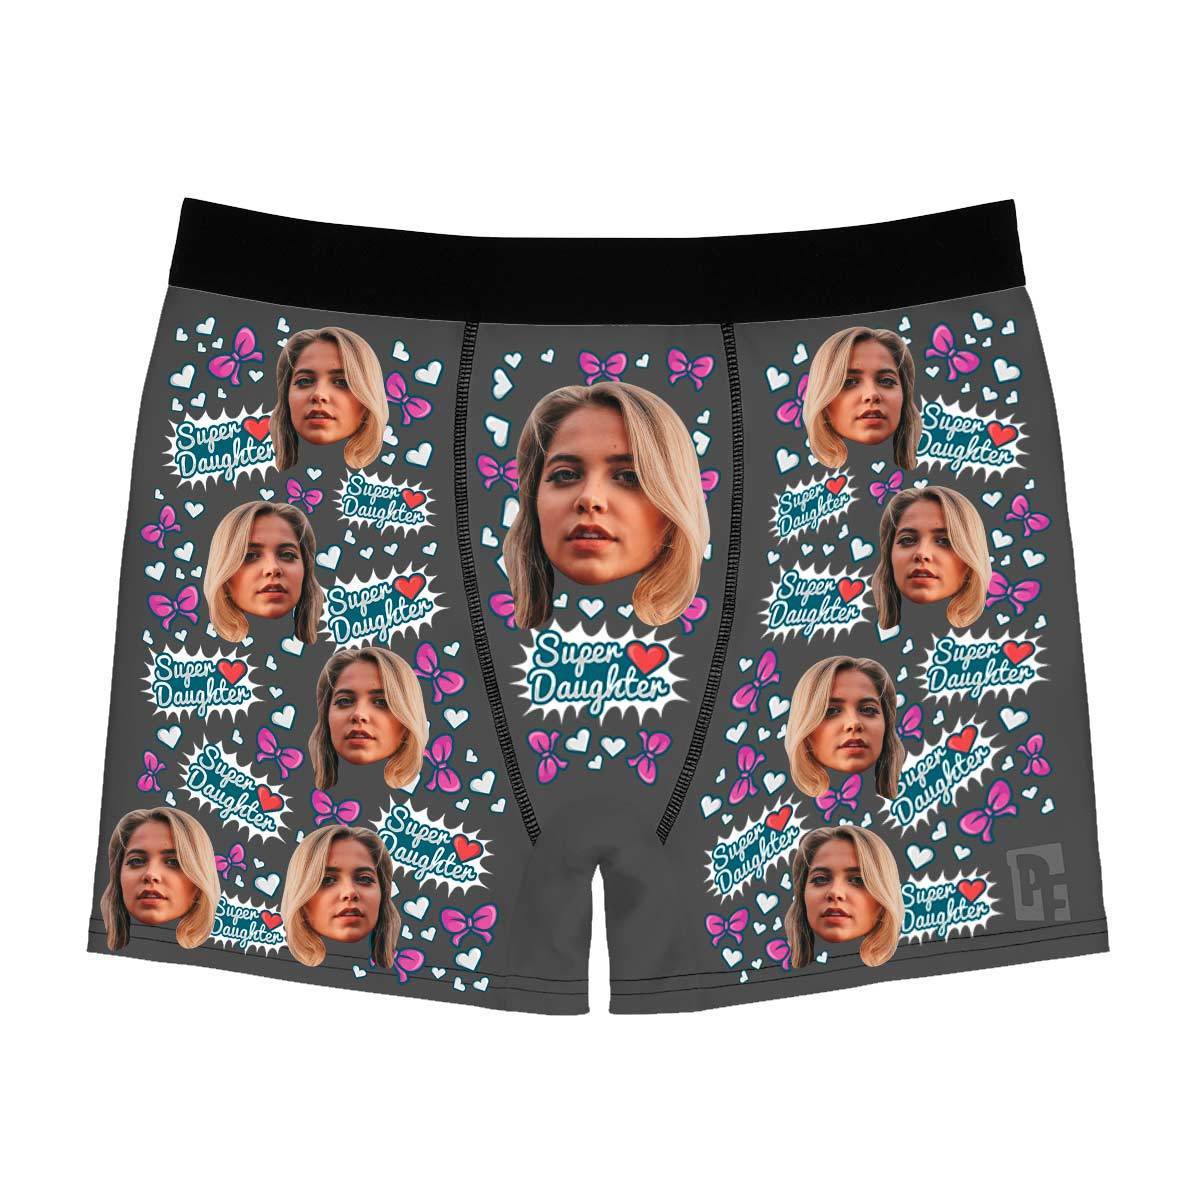 Dark Super daughter men's boxer briefs personalized with photo printed on them